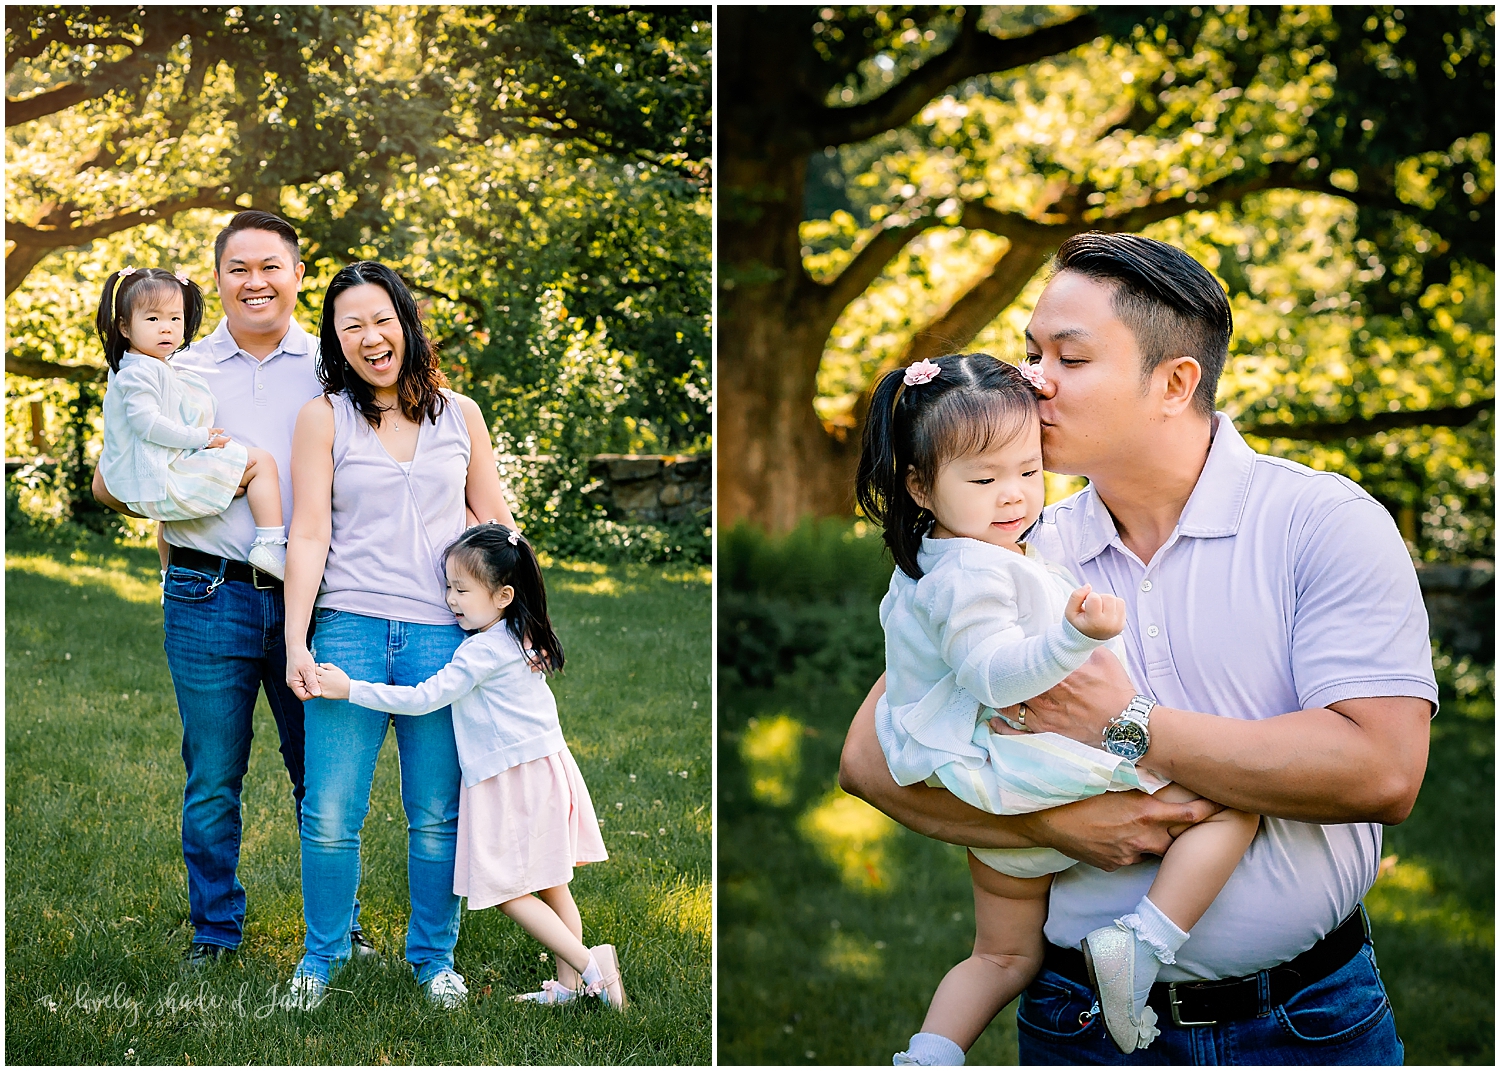 Fun_Extended_Family_Session_Morristown_NJ_Photography_0013.jpg